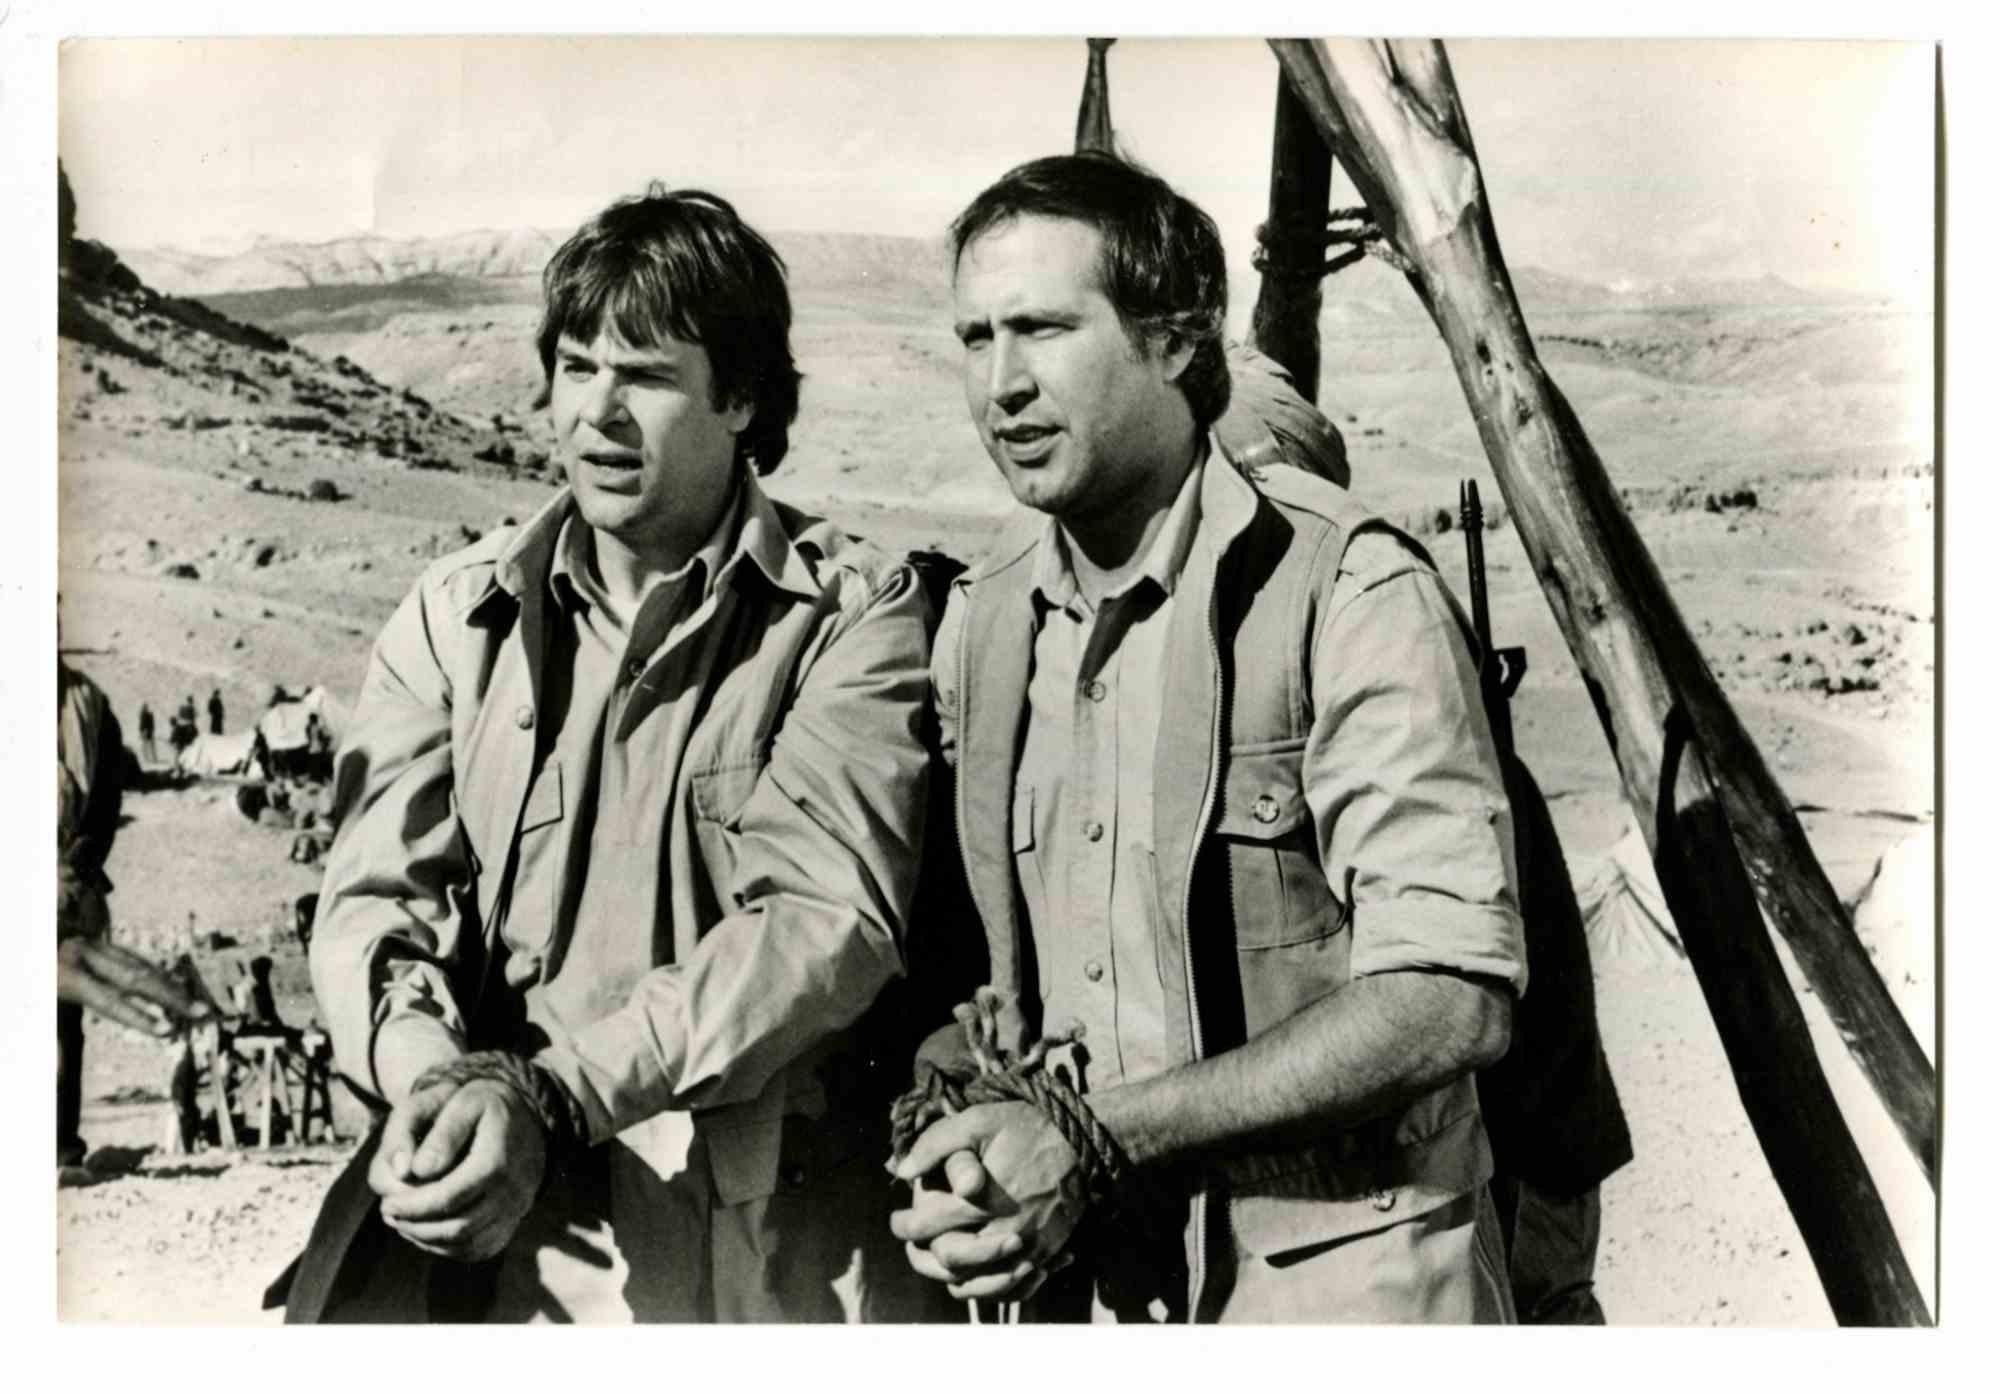 Unknown Figurative Photograph - Check Chase and Dan Aykroyd - Vintage Photo - 1970s